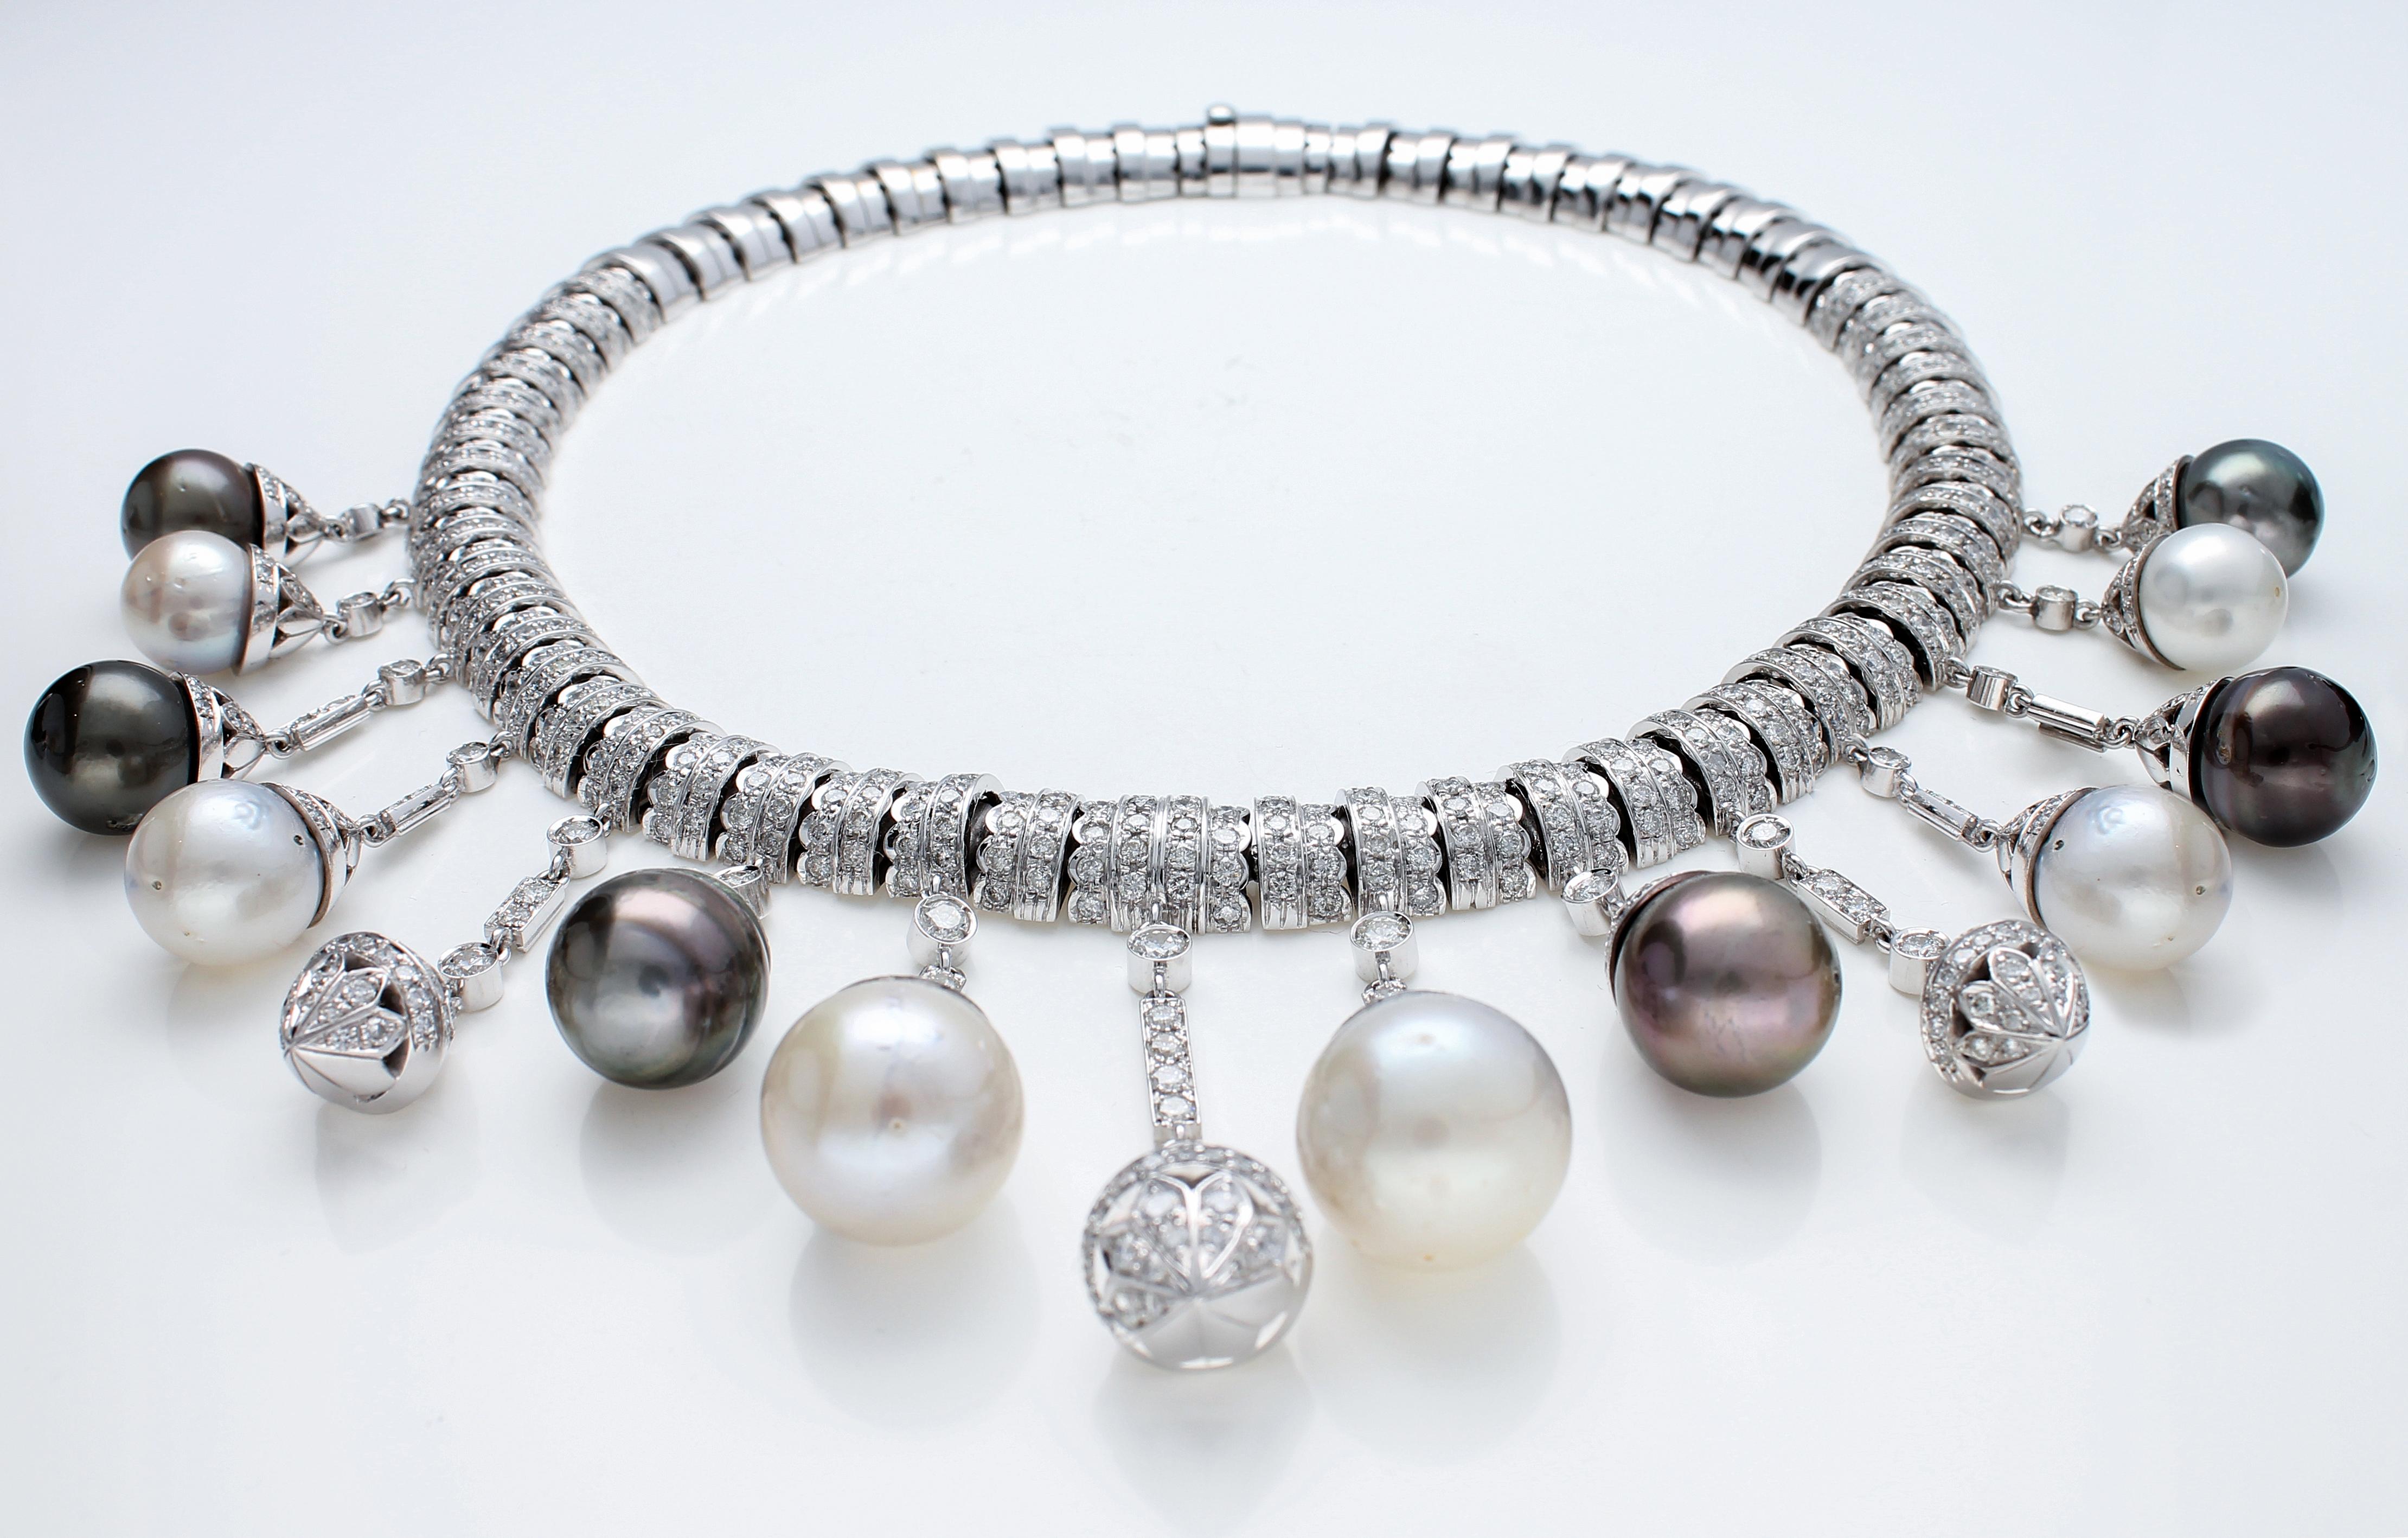 Necklace White Gold and Diamonds, Pendants with White and Black Pearls S.S. For Sale 10